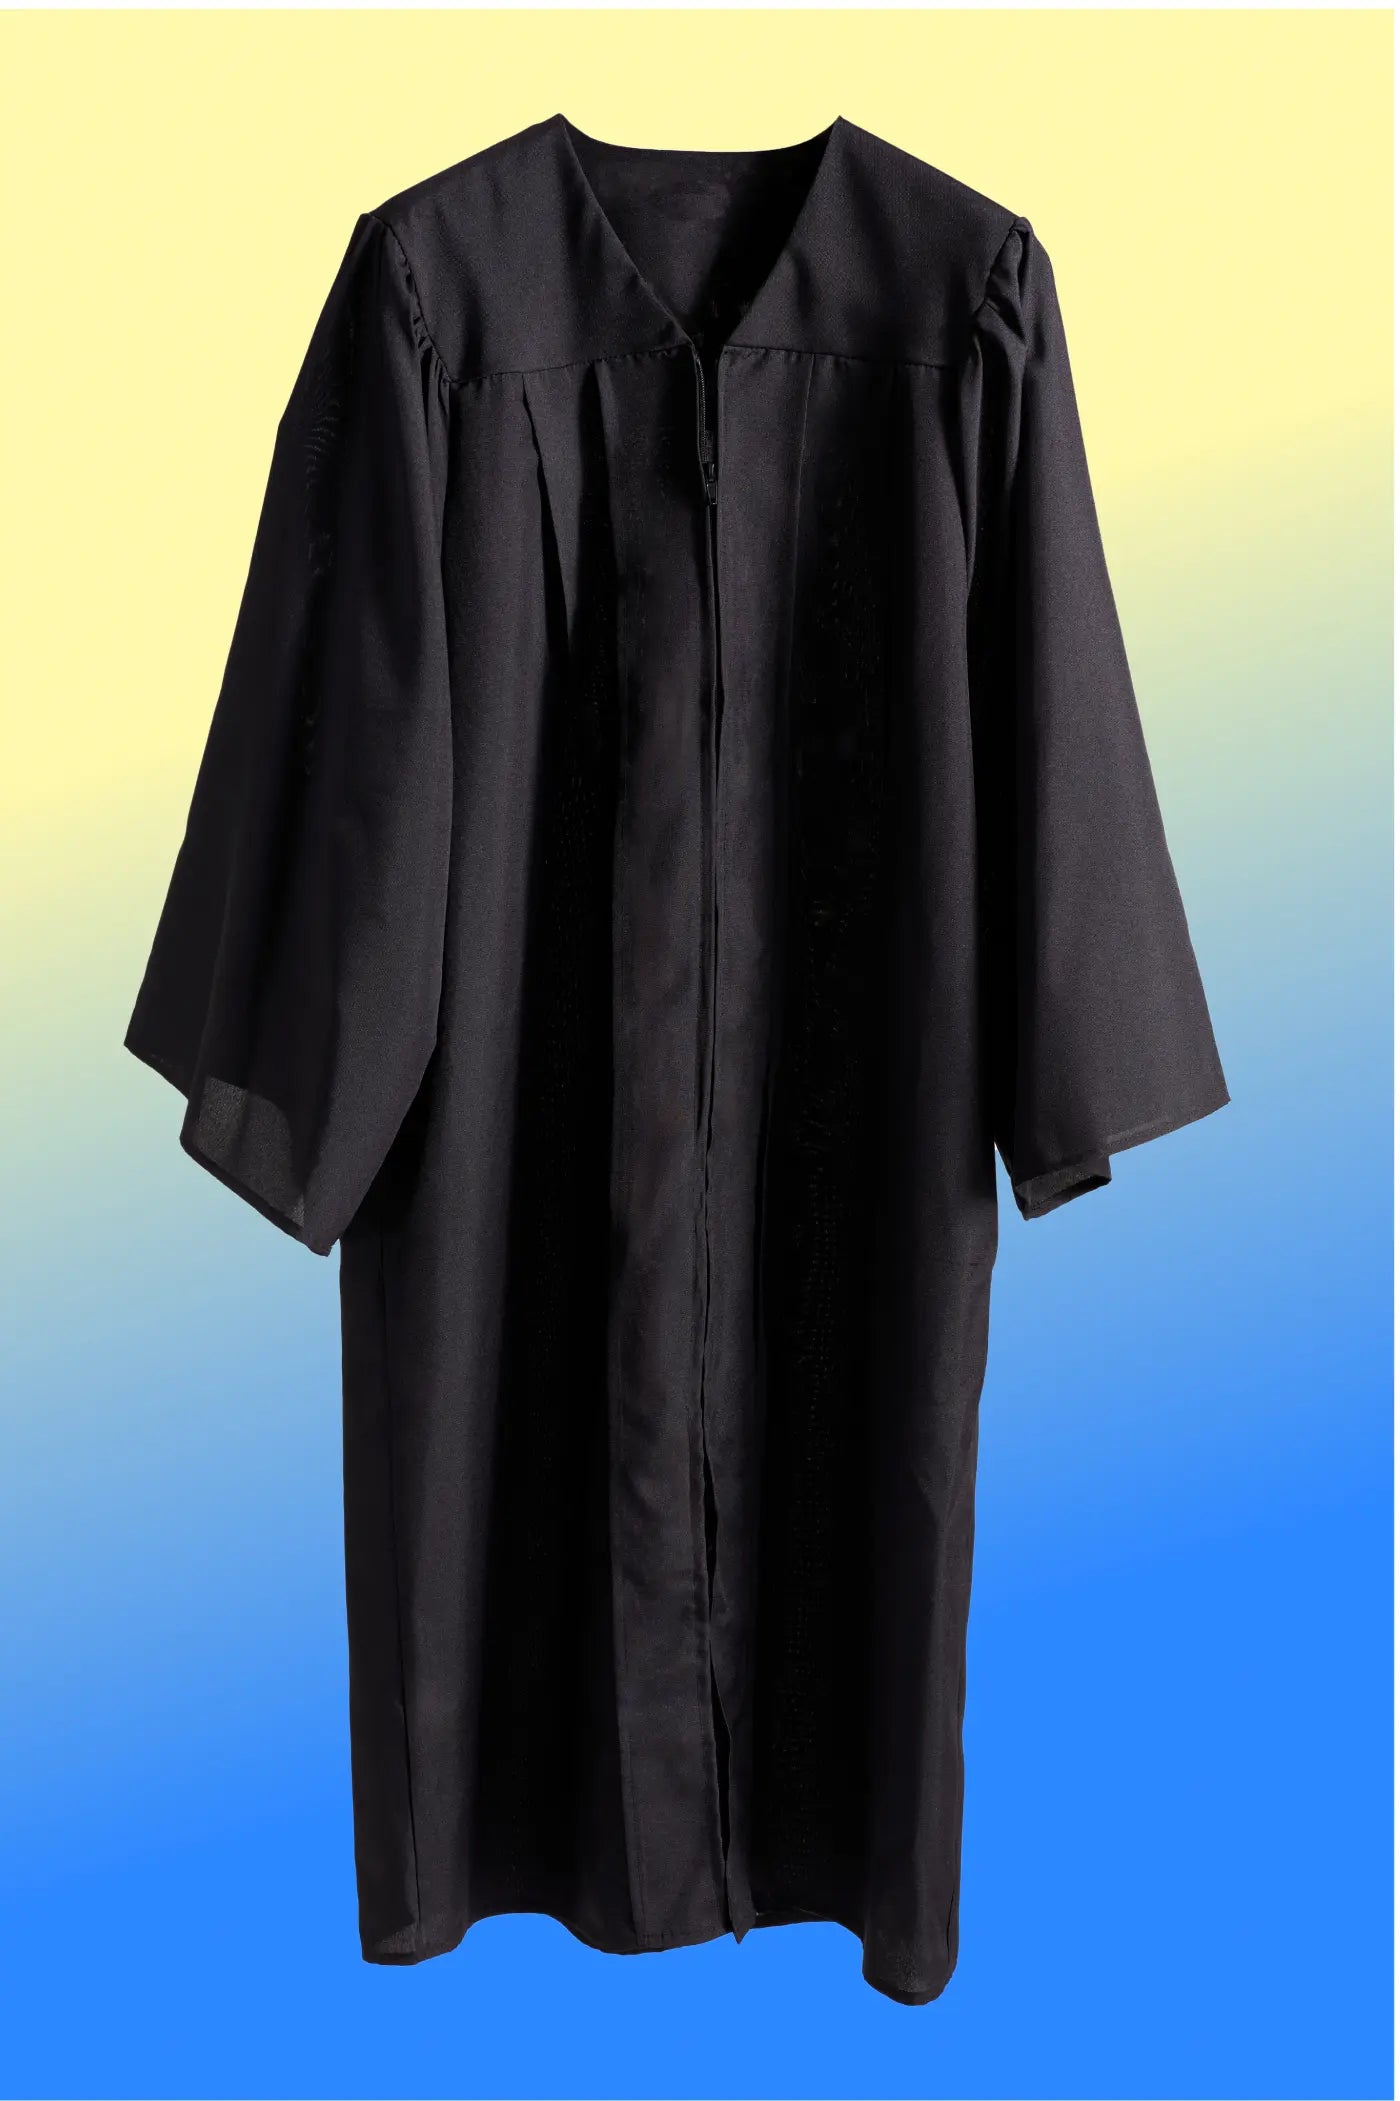 HAPPY TASSEL | UC Berkeley Bachelor's Gown with Pockets and Hook